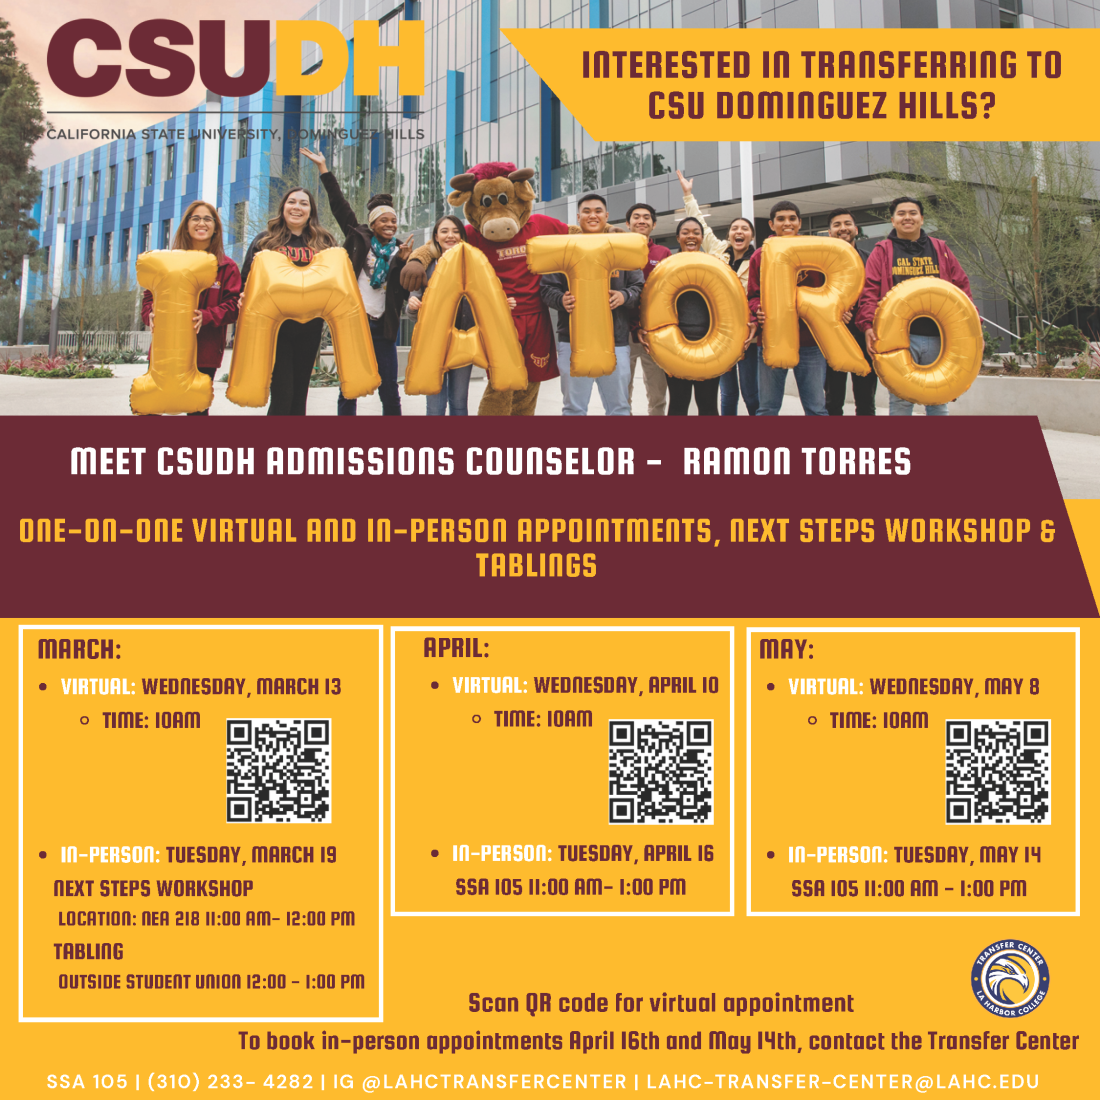 CSUDH flyer with virtual/in-person appointments, next steps workshop & tabling information and dates.